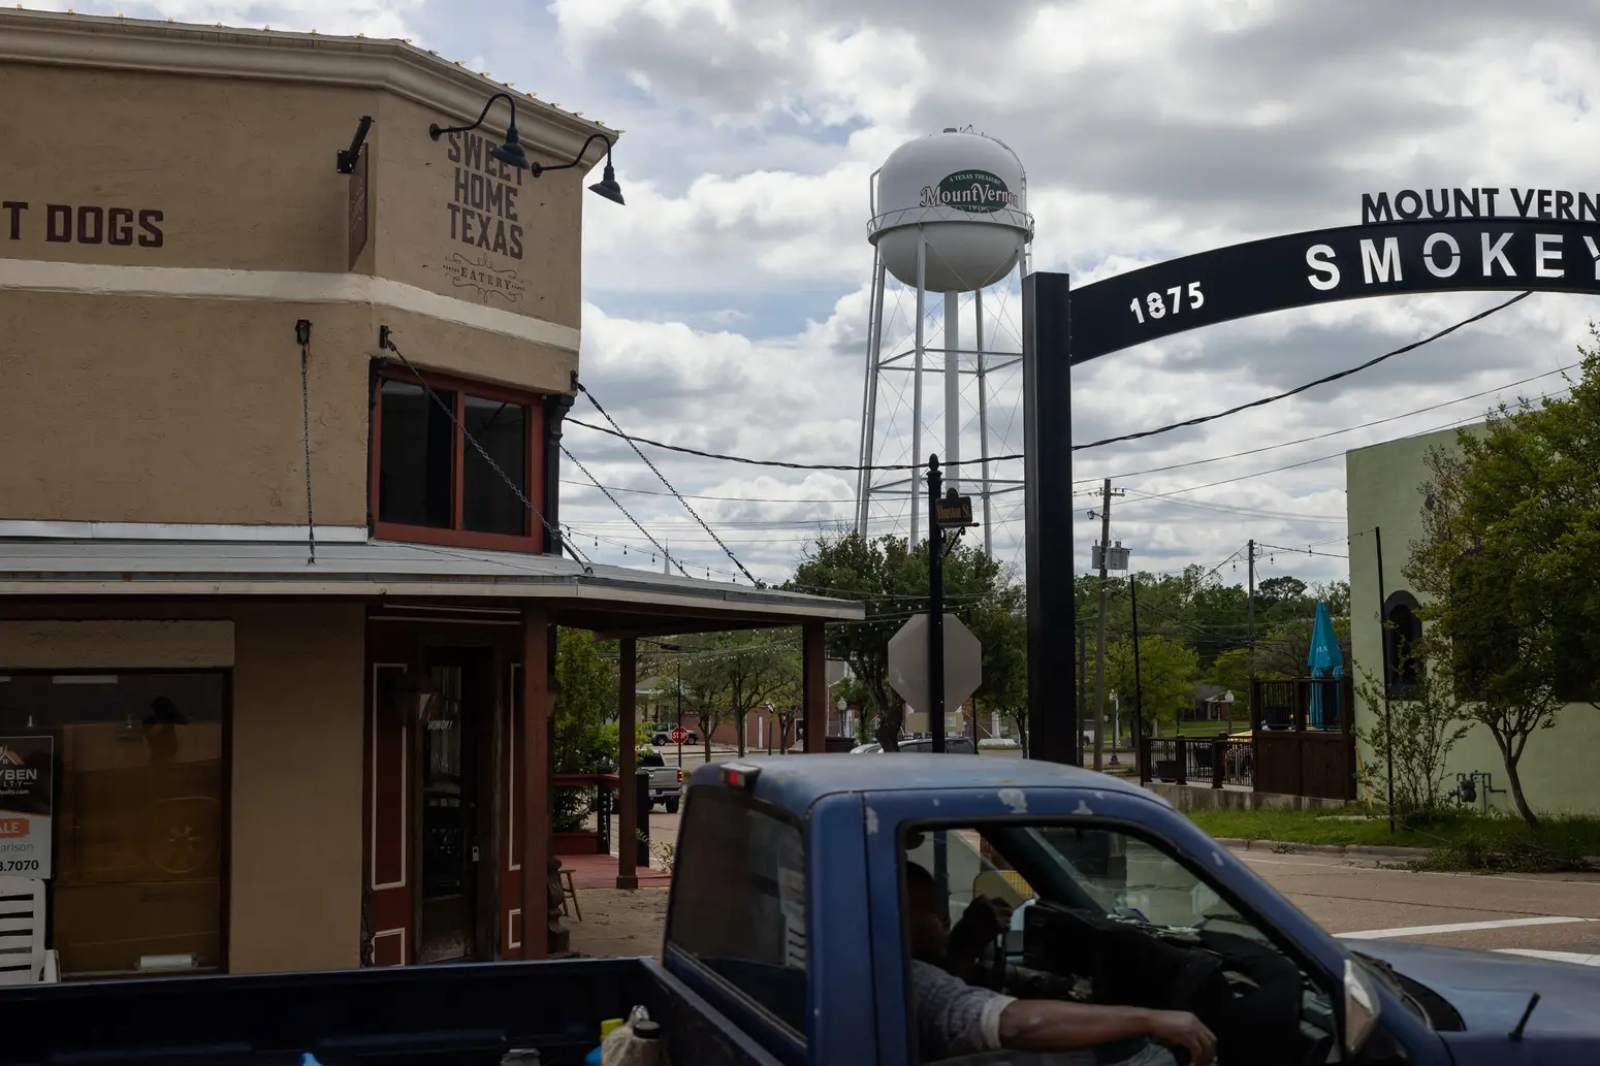 A truck drives through a small town with a water tower.